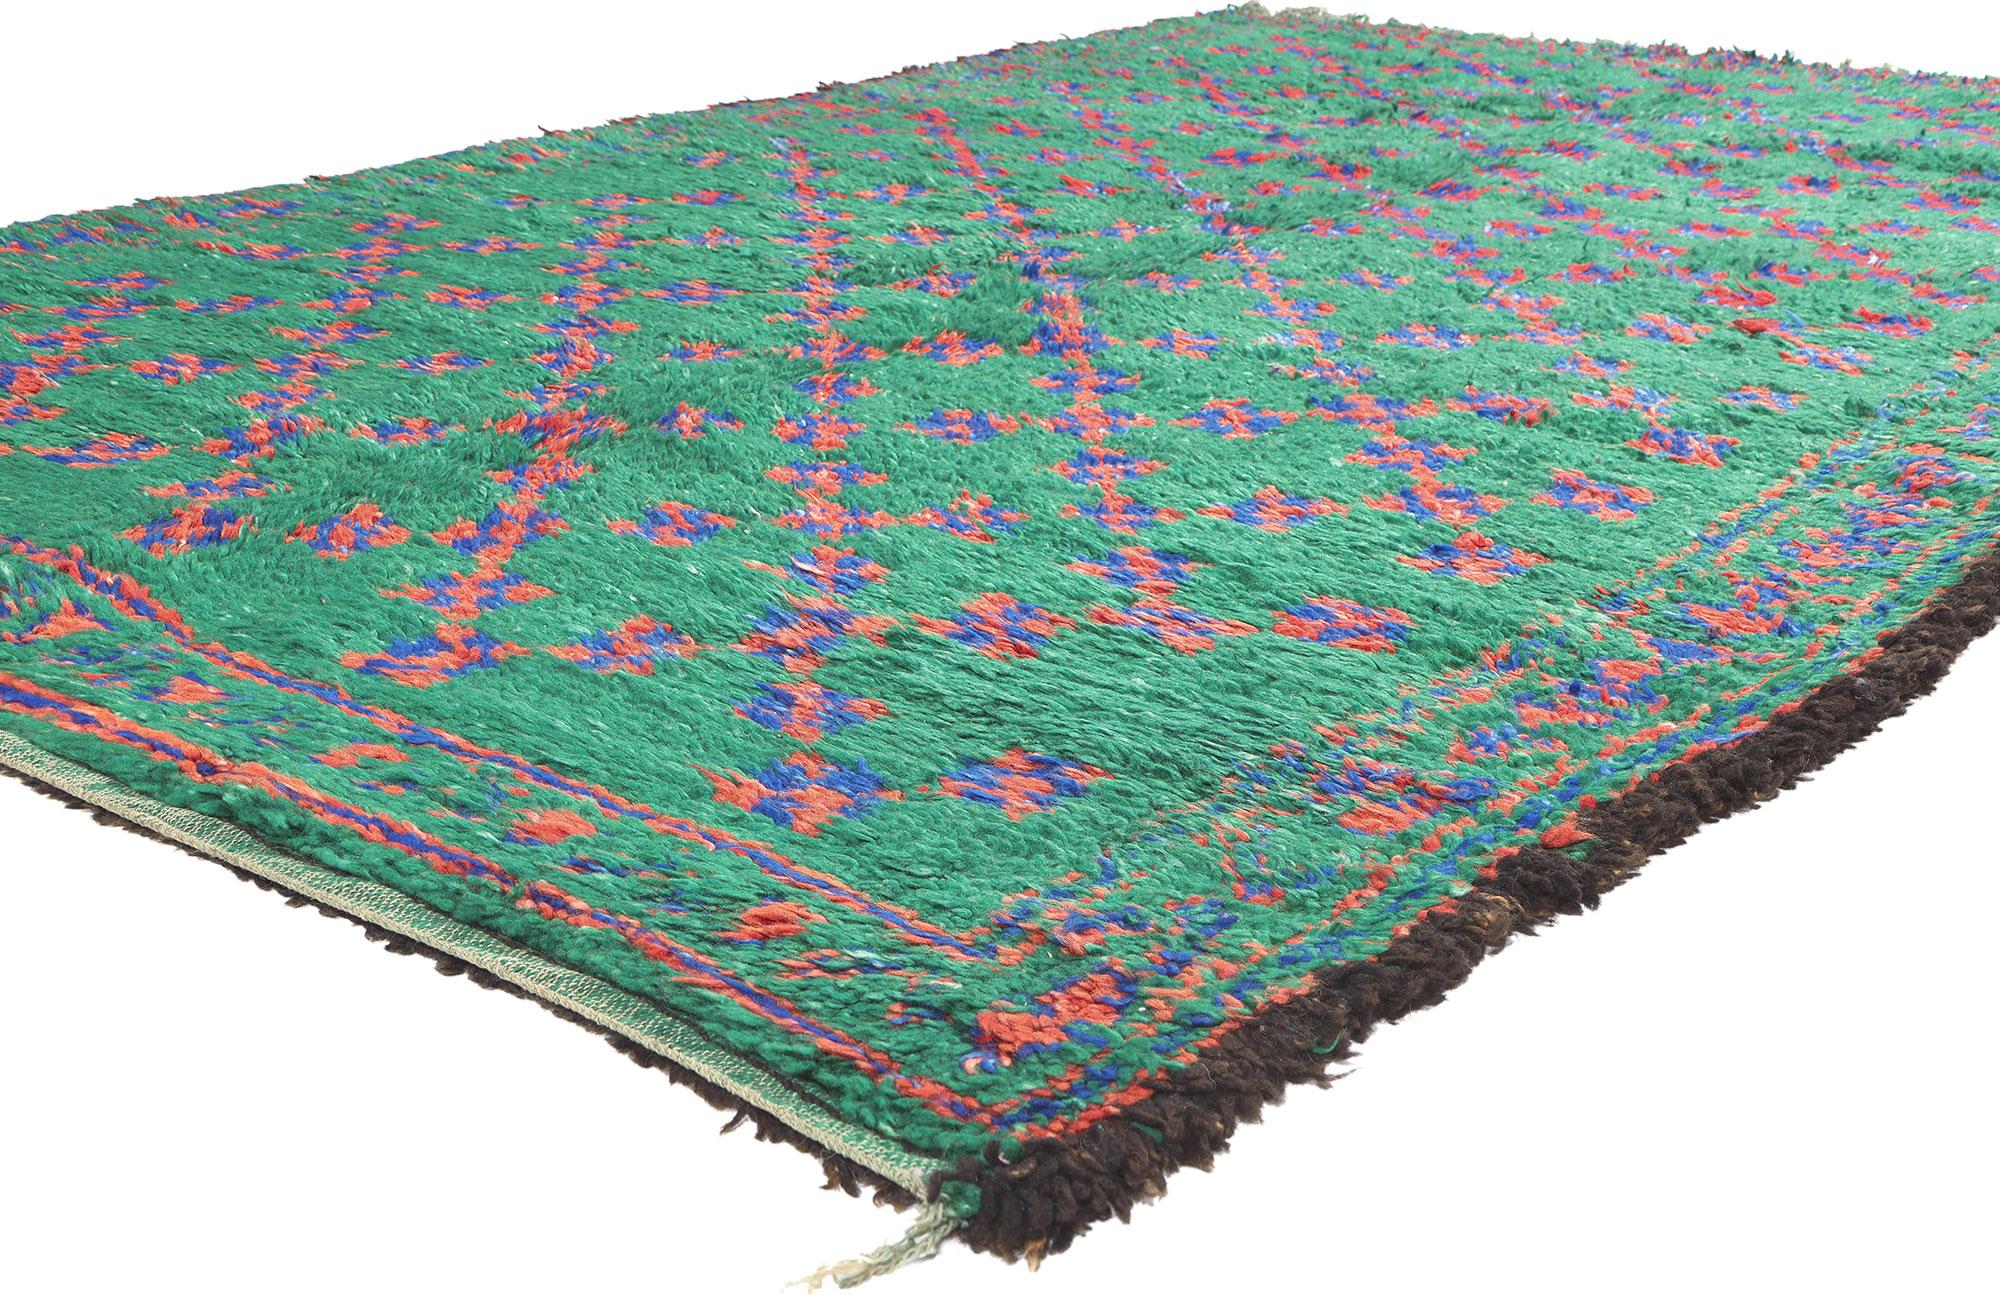 21216 Vintage Green Beni MGuild Moroccan Rug, 06'00 x 10'02. Woven with the enchanting expertise of Berber women from the Ait M'Guild tribe in the mystical Atlas Mountains of Morocco, Beni Mguild rugs stand as revered artifacts, embodying masterful